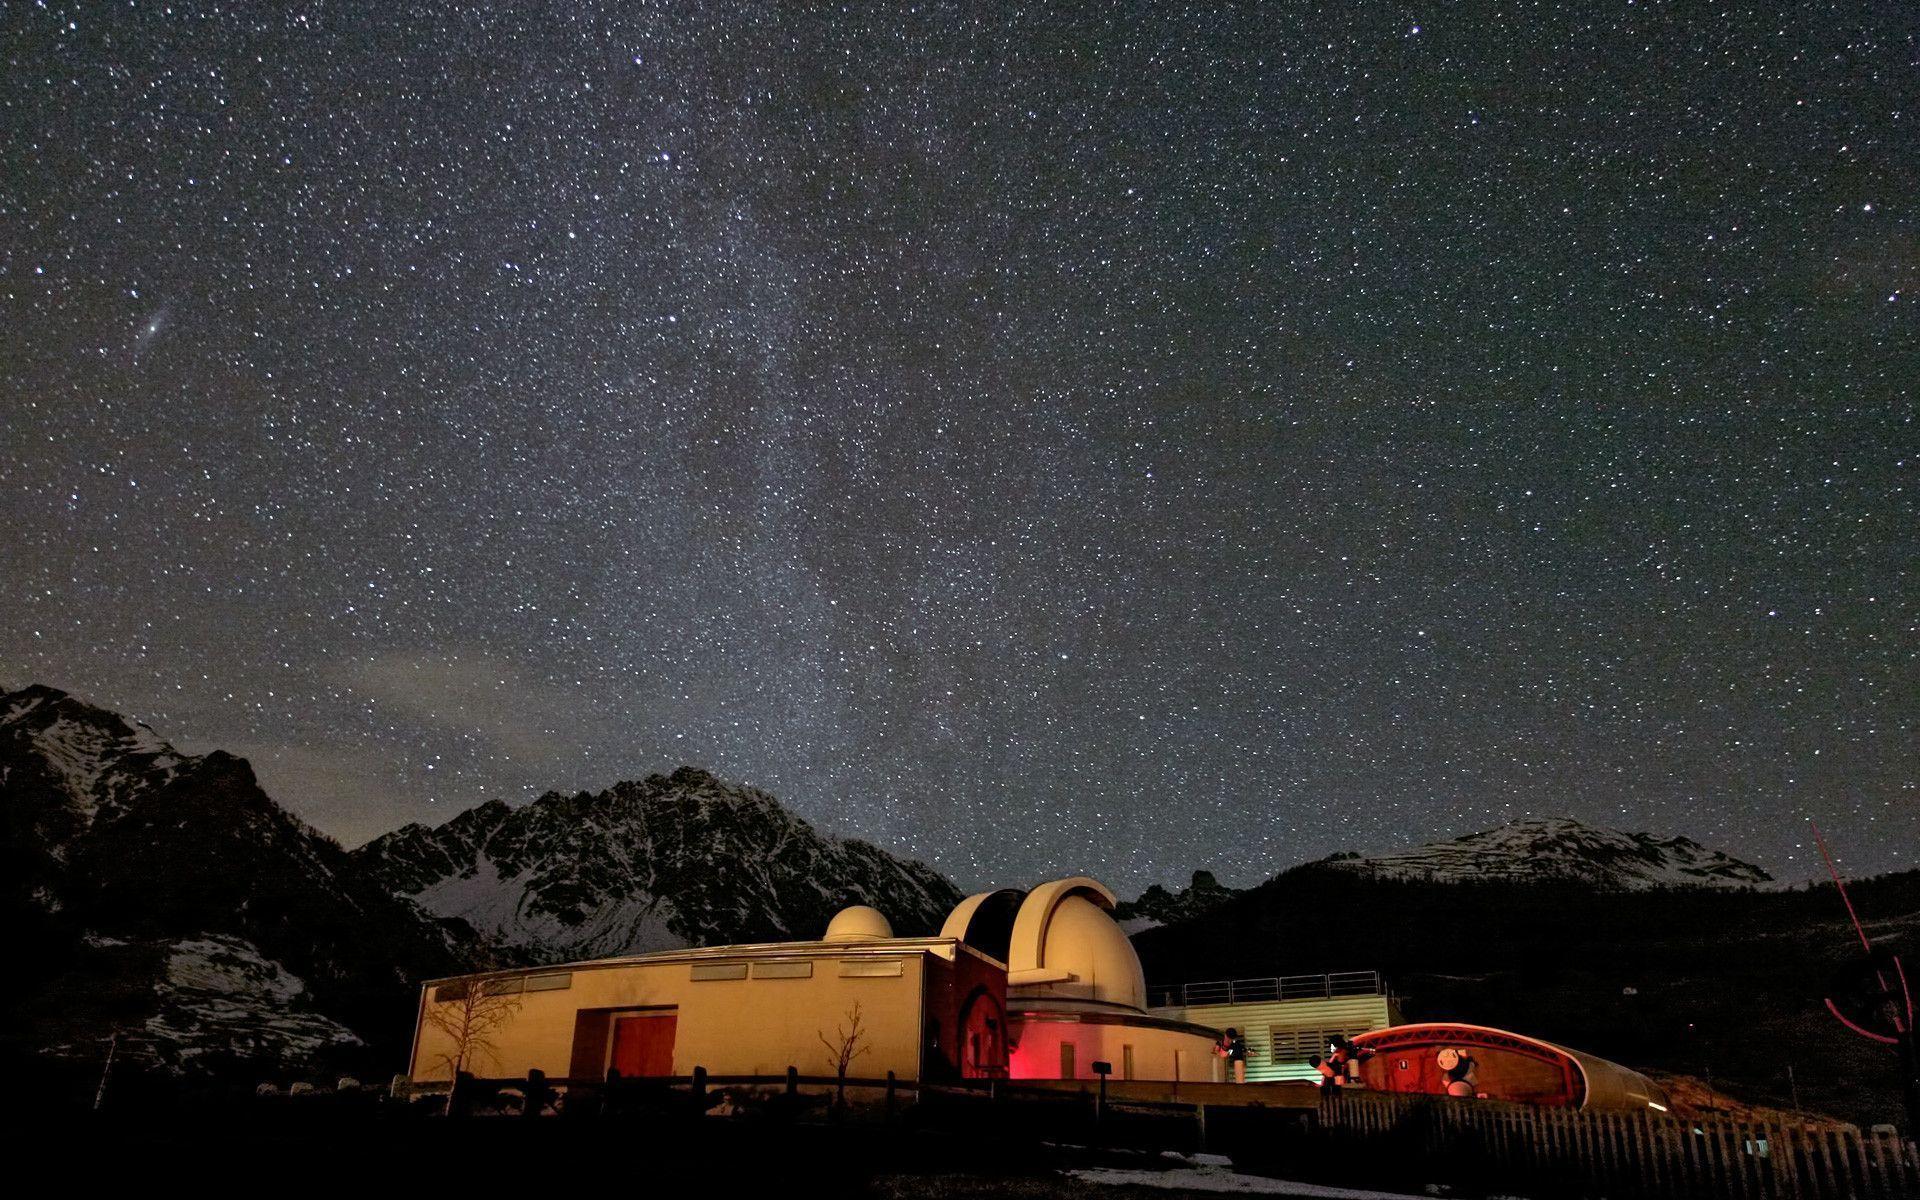 The Astronomical Observatory of the Aosta Valley wallpaper